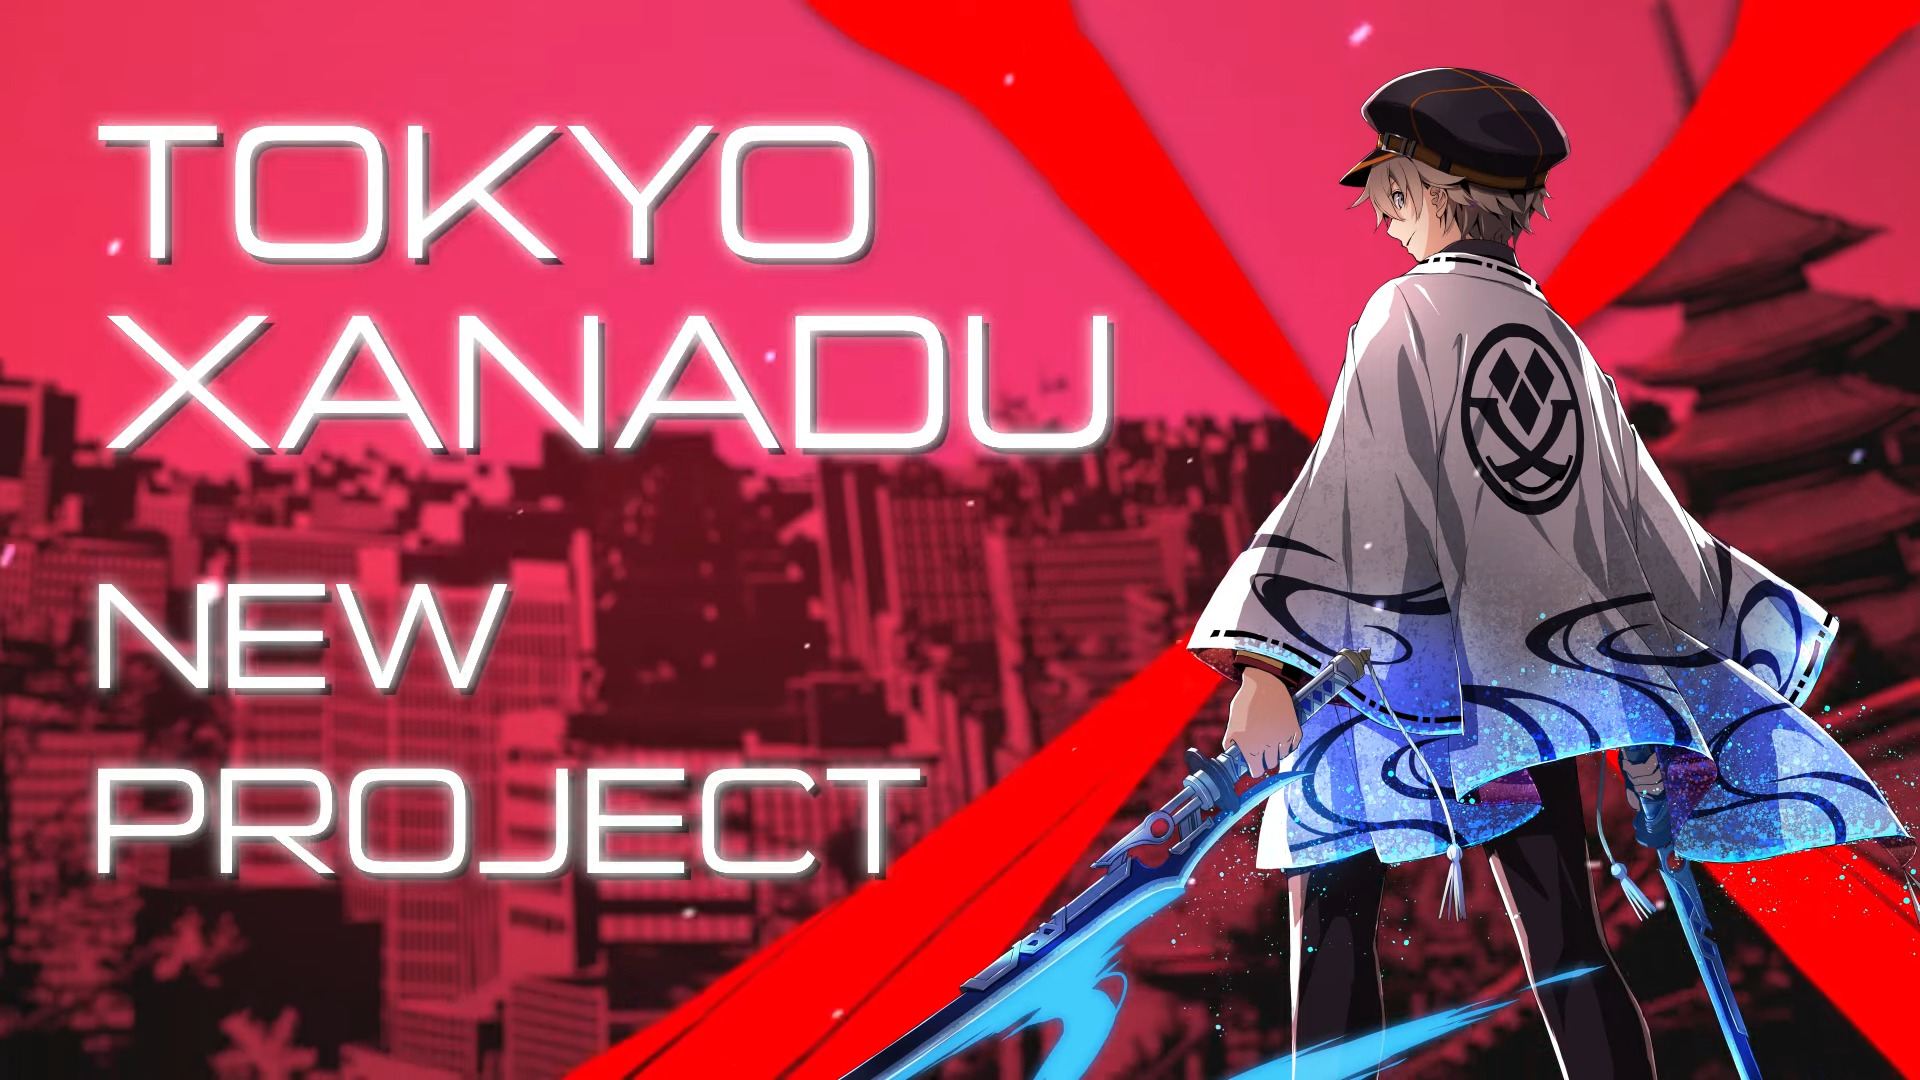 Tokyo Xanadu New Project Announced by Falcom, First Teaser Released